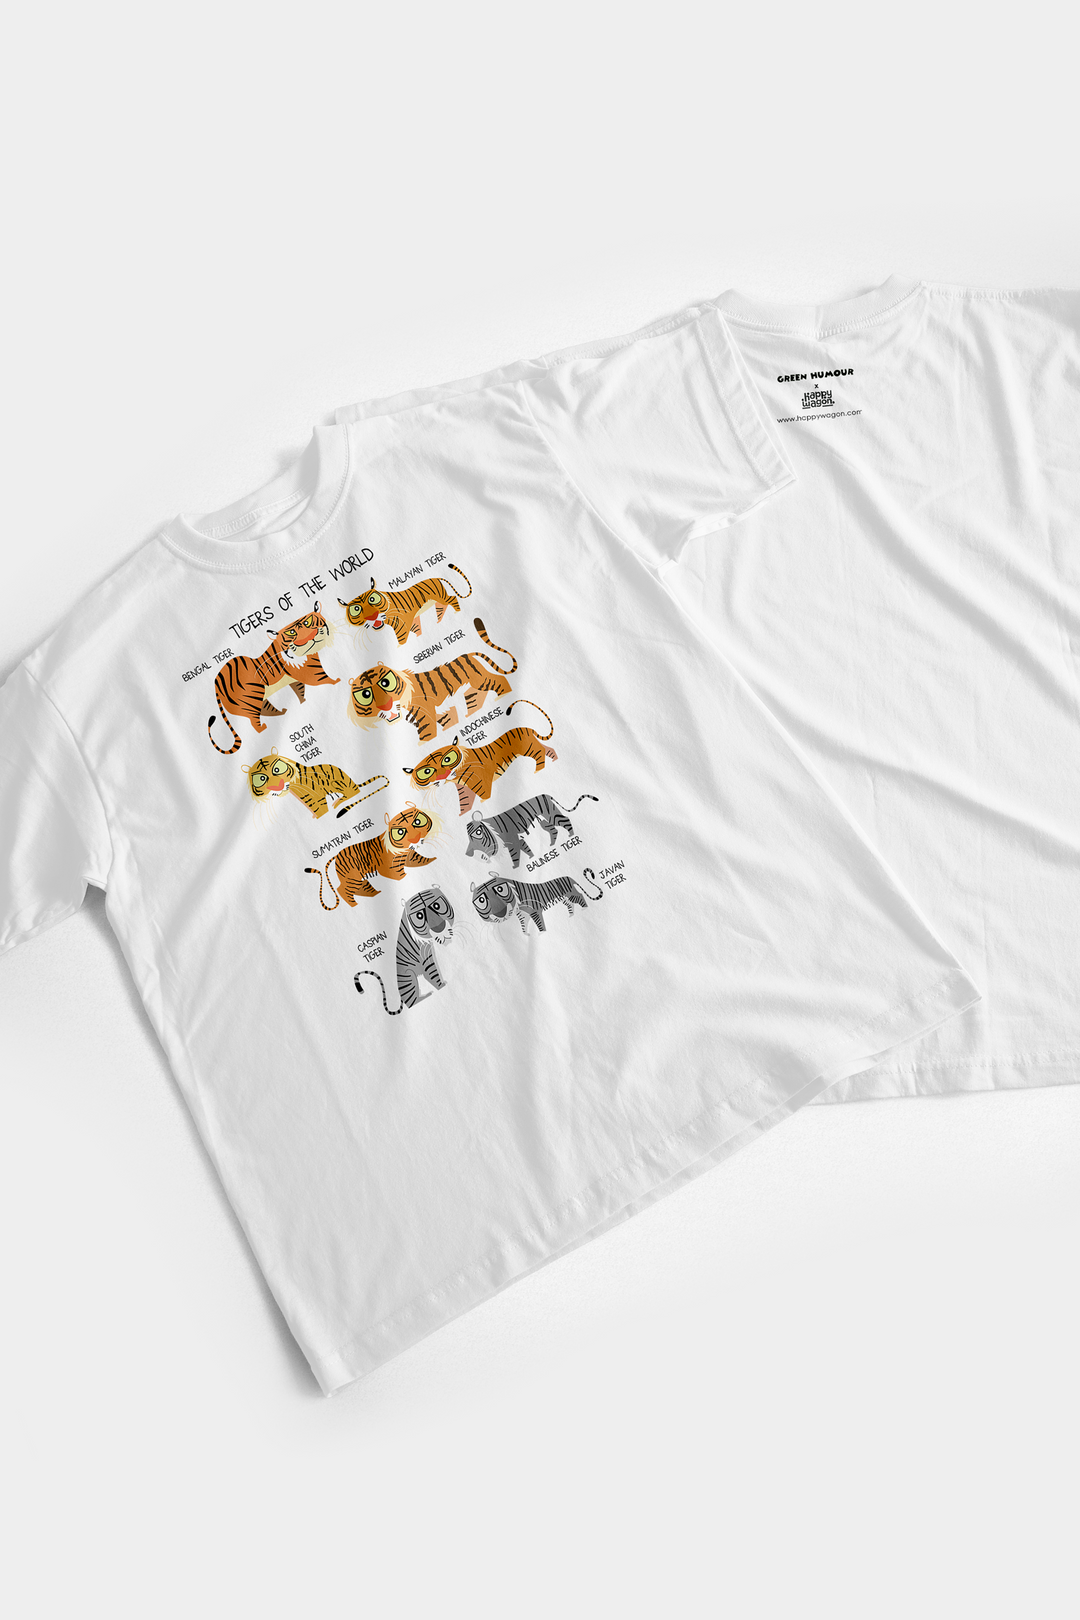 Tigers of the World (compilation) T-shirt